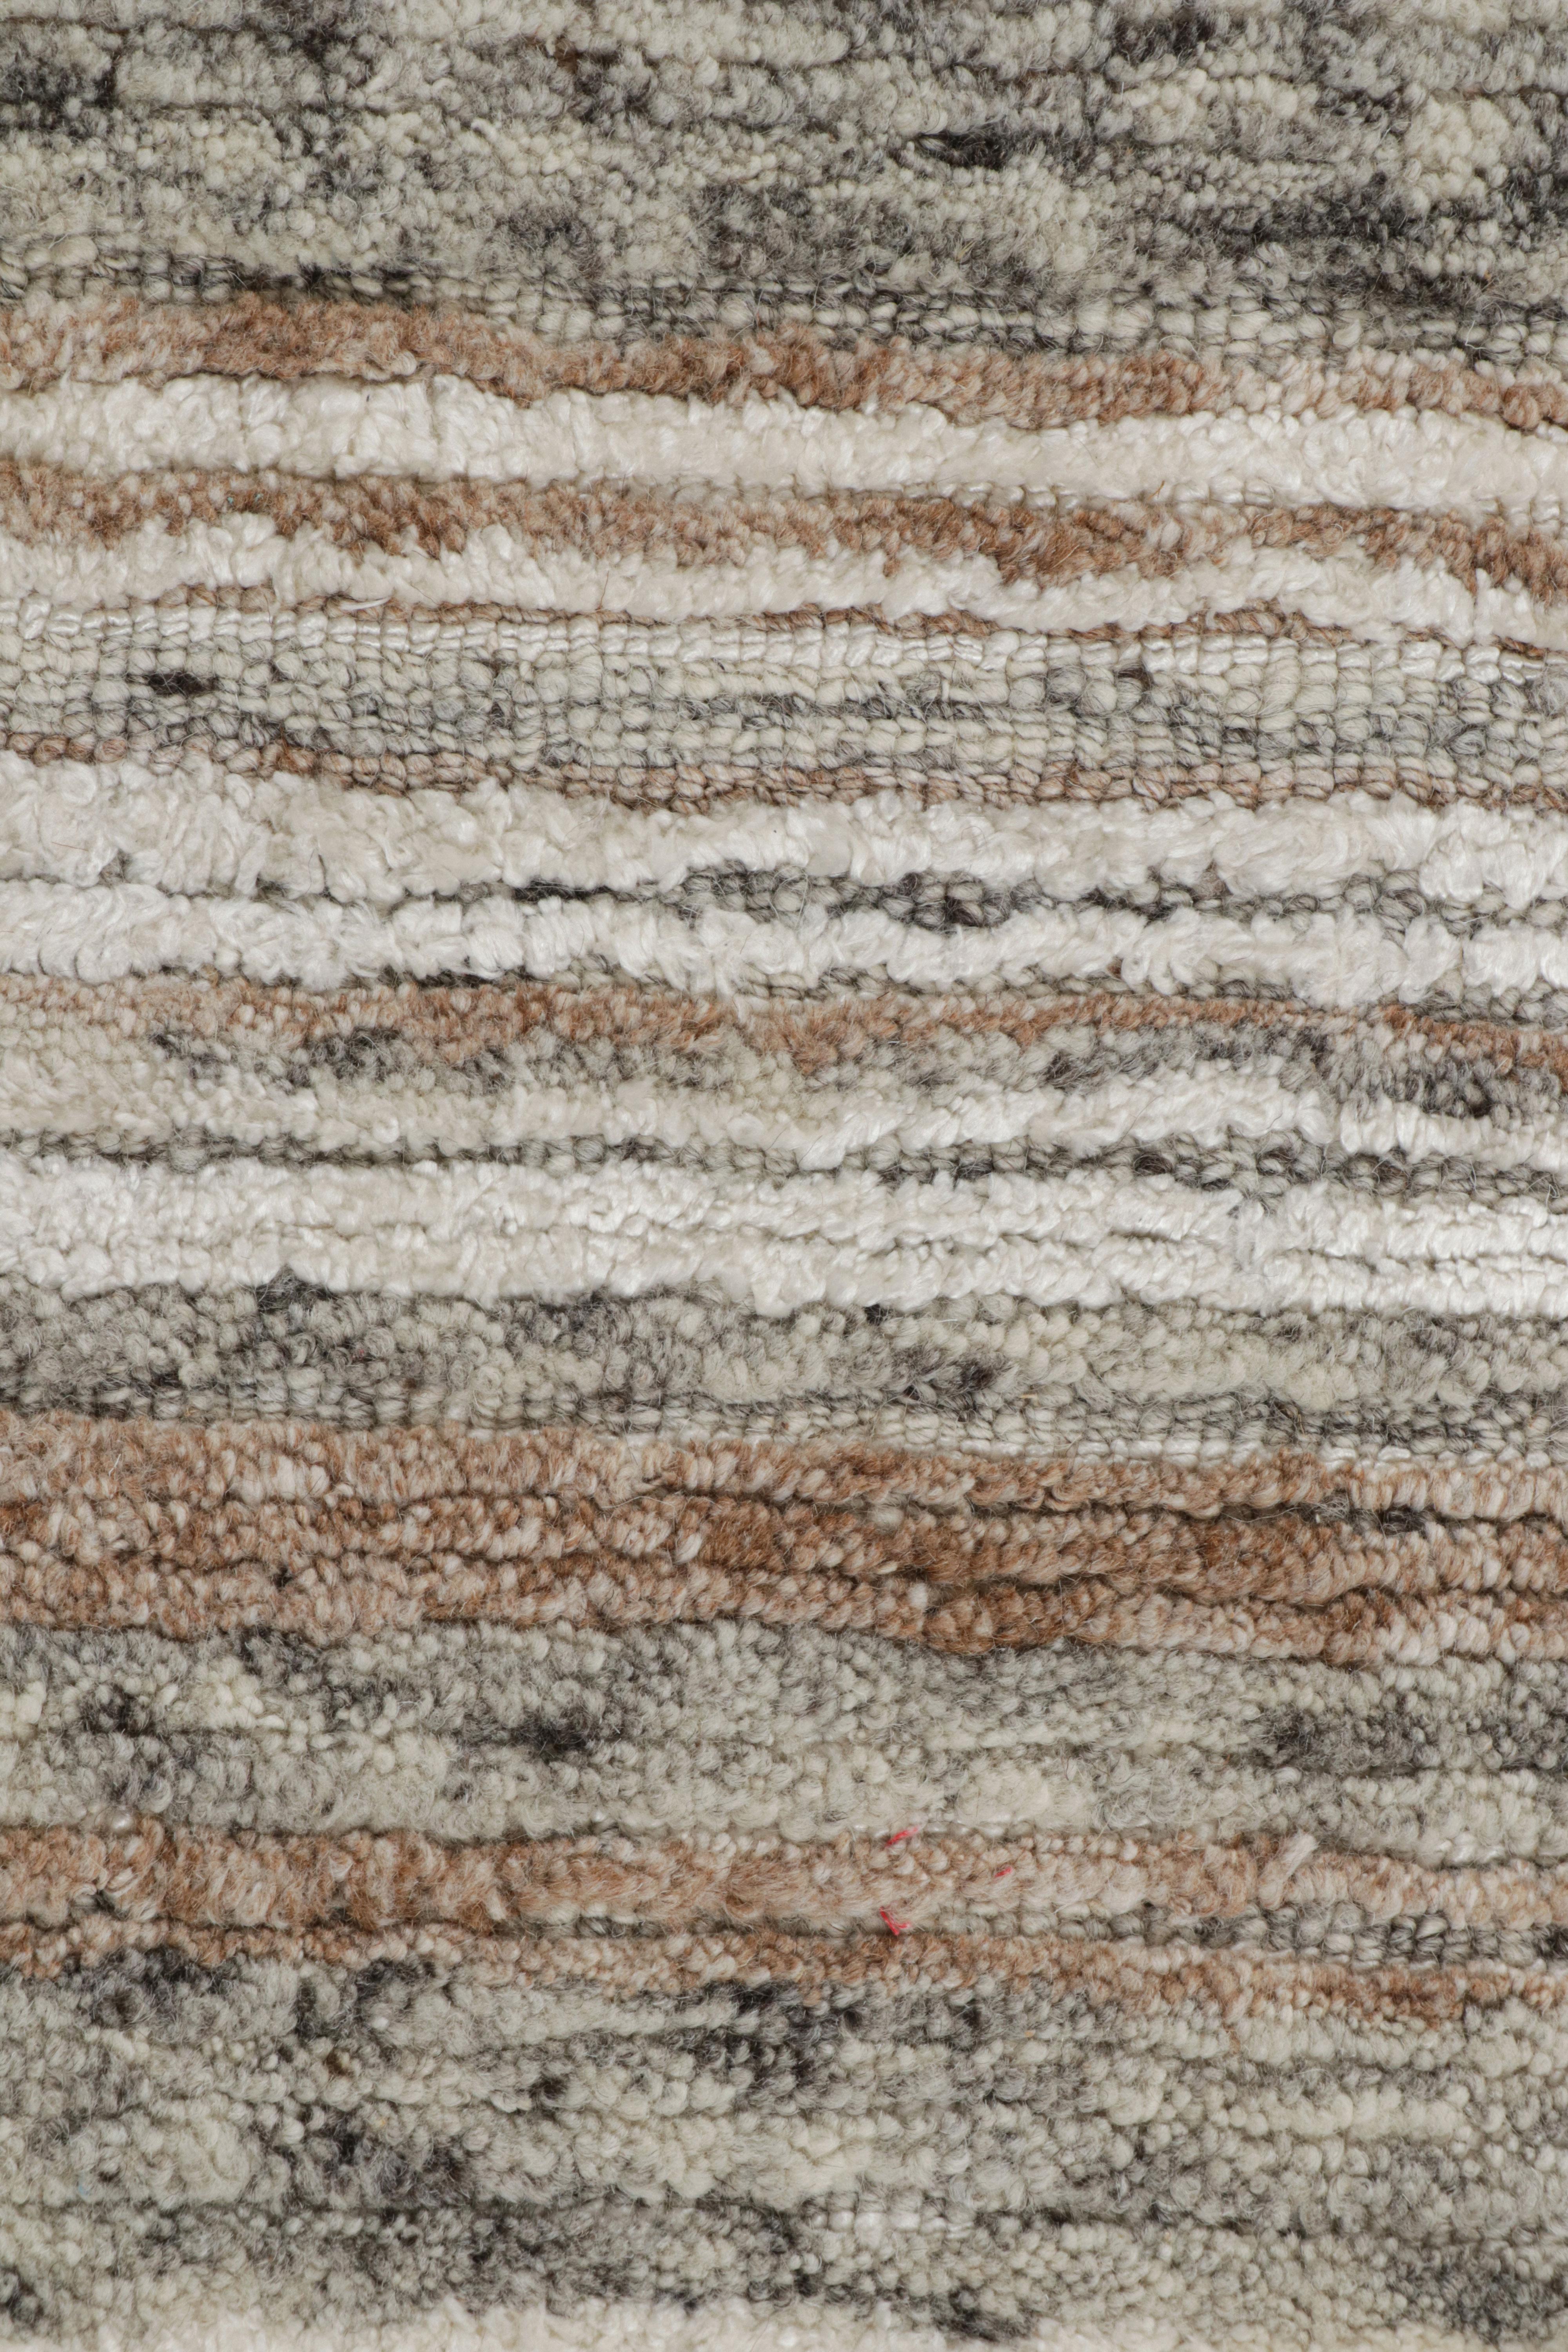 Hand-Woven Rug & Kilim’s Textural Rug with Beige-Brown and Gray Stripes “Light on Loom” For Sale